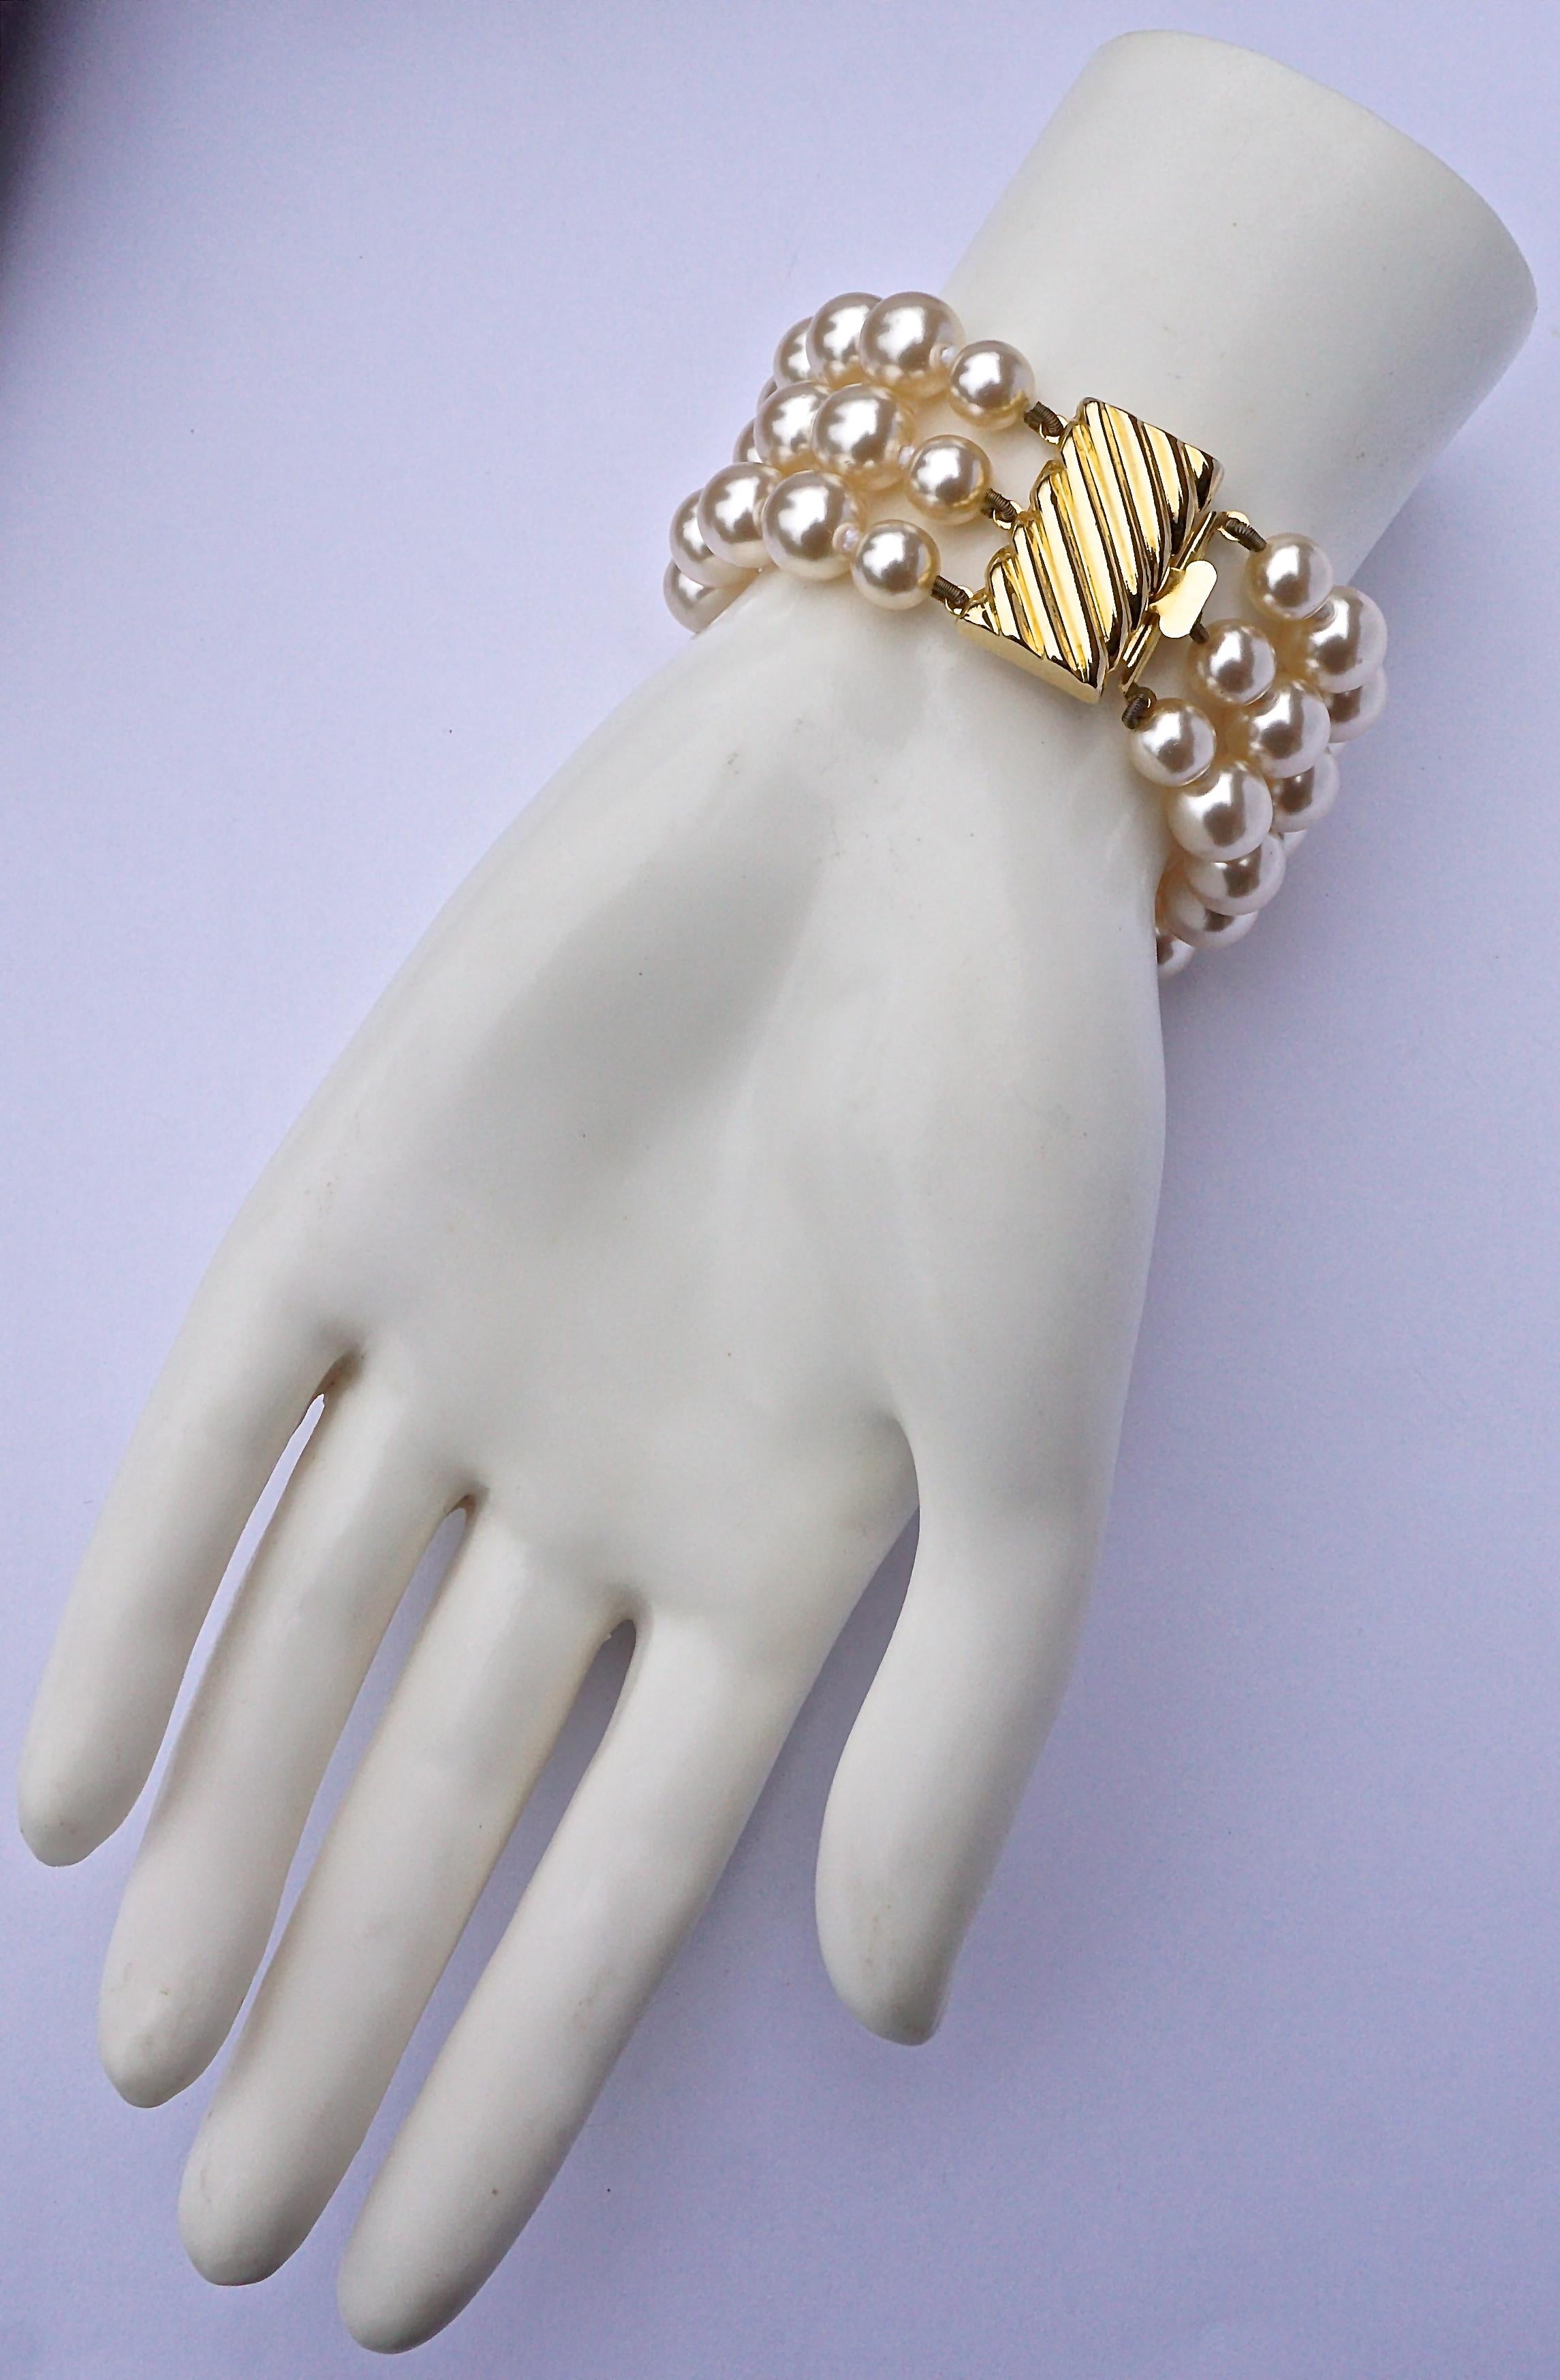 Women's Triple Strand Knotted Faux Pearl Bracelet with a Fancy Gold Tone Clasp